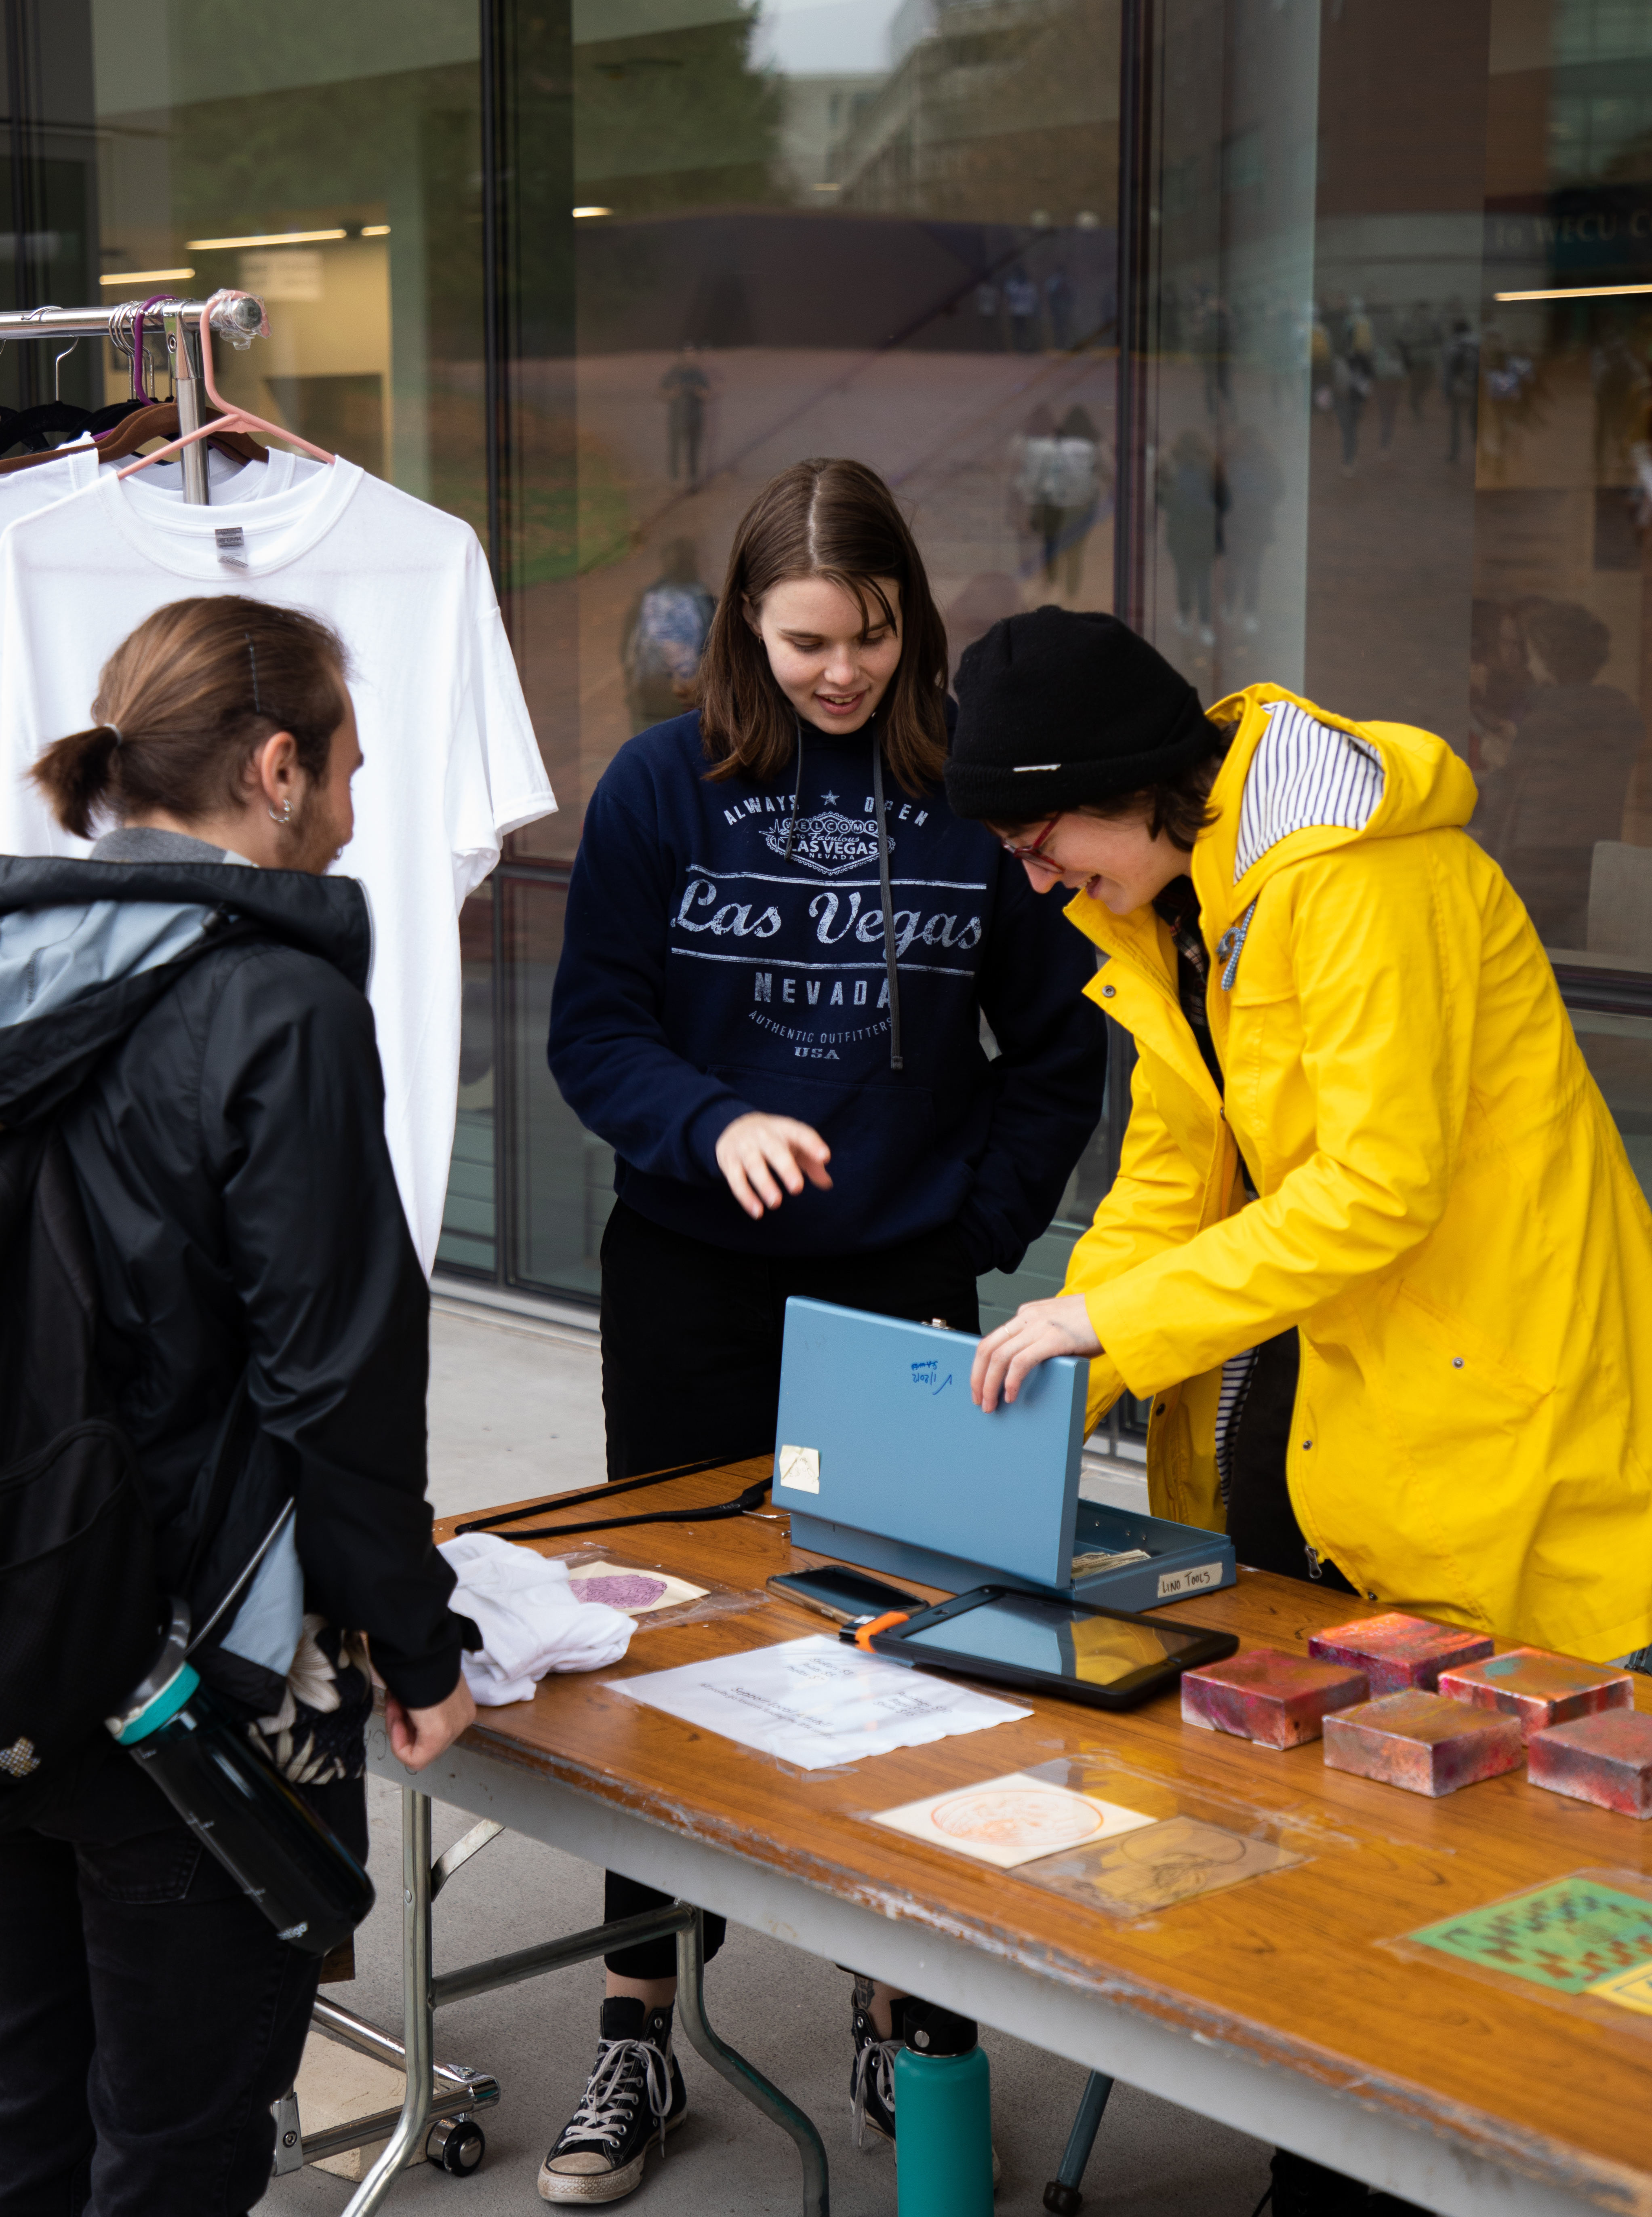 A person waits with a folded shirt at a display table while two people examine the contents of a cash box from the other side of the table. All are smiling.